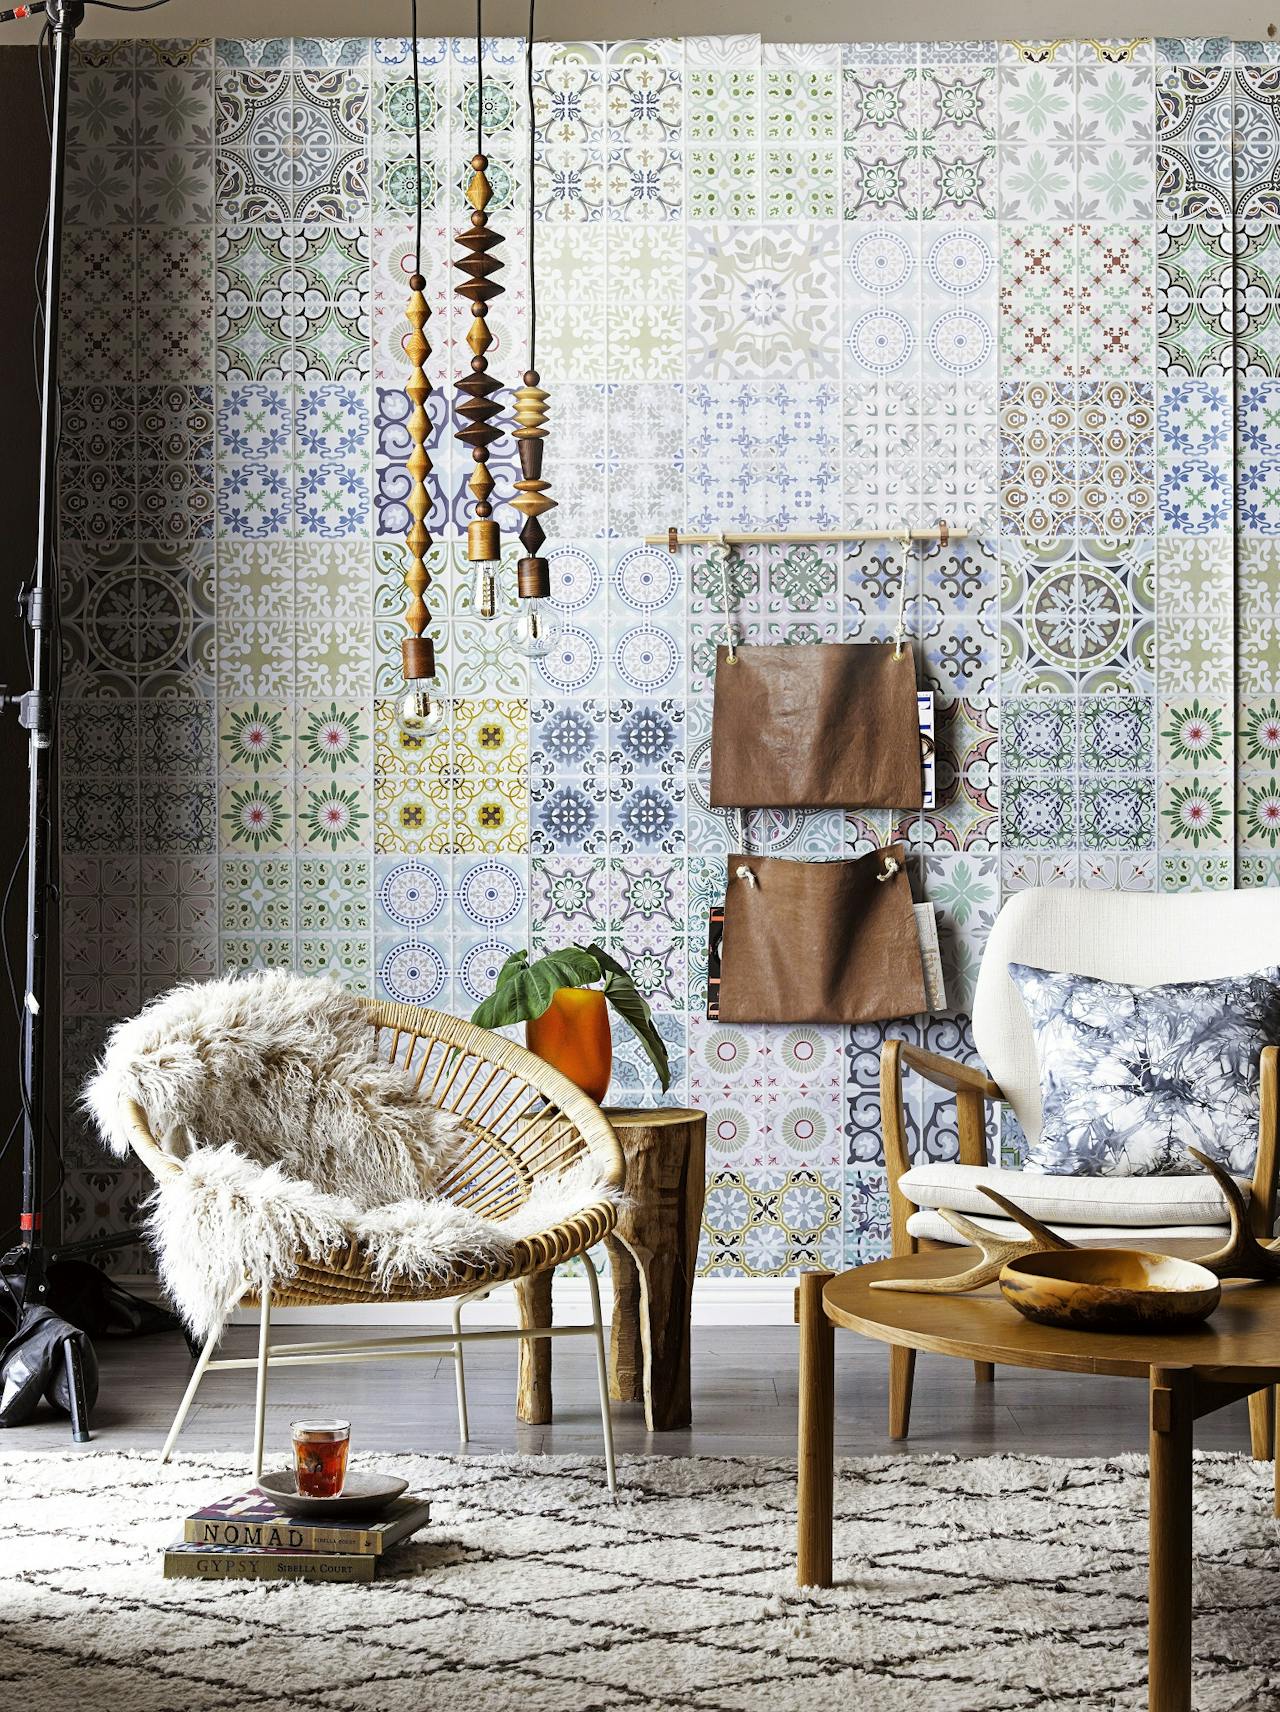 Pompeii Meander Injectie Boho-chic in interieurstyling